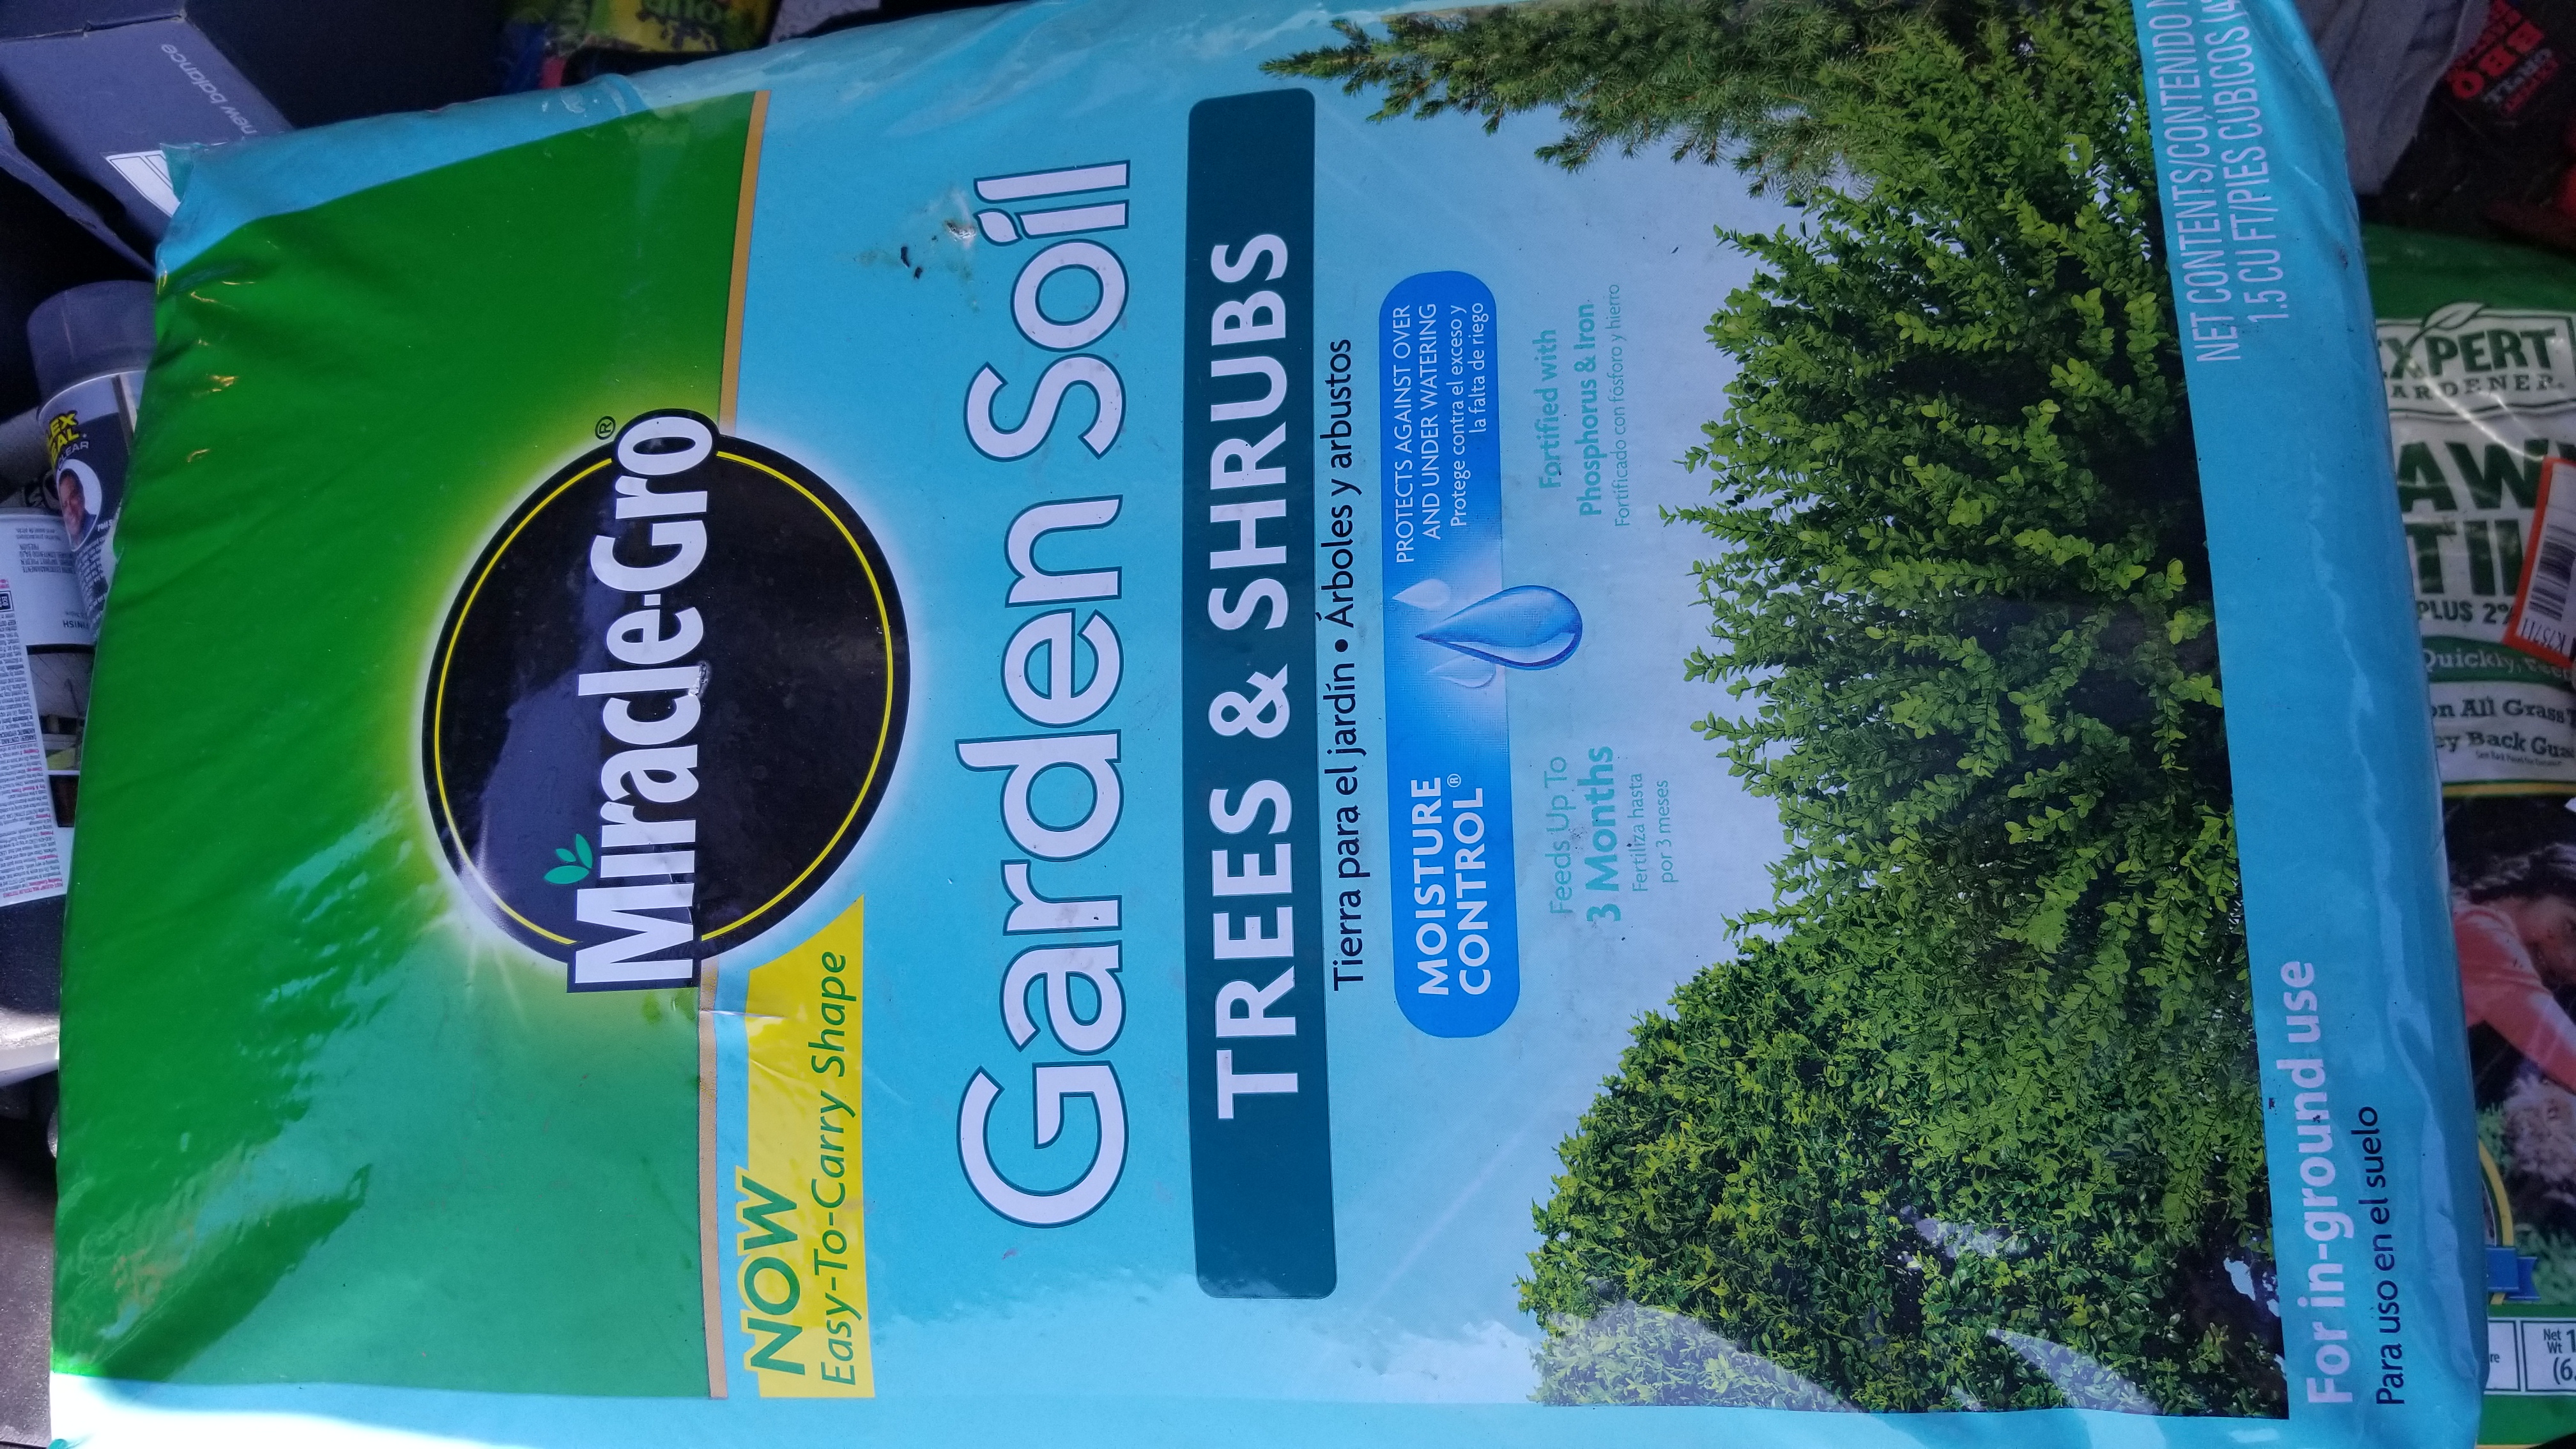 Ymmv Home Depot Miracle Gro Garden Soil Tree And Shrubs